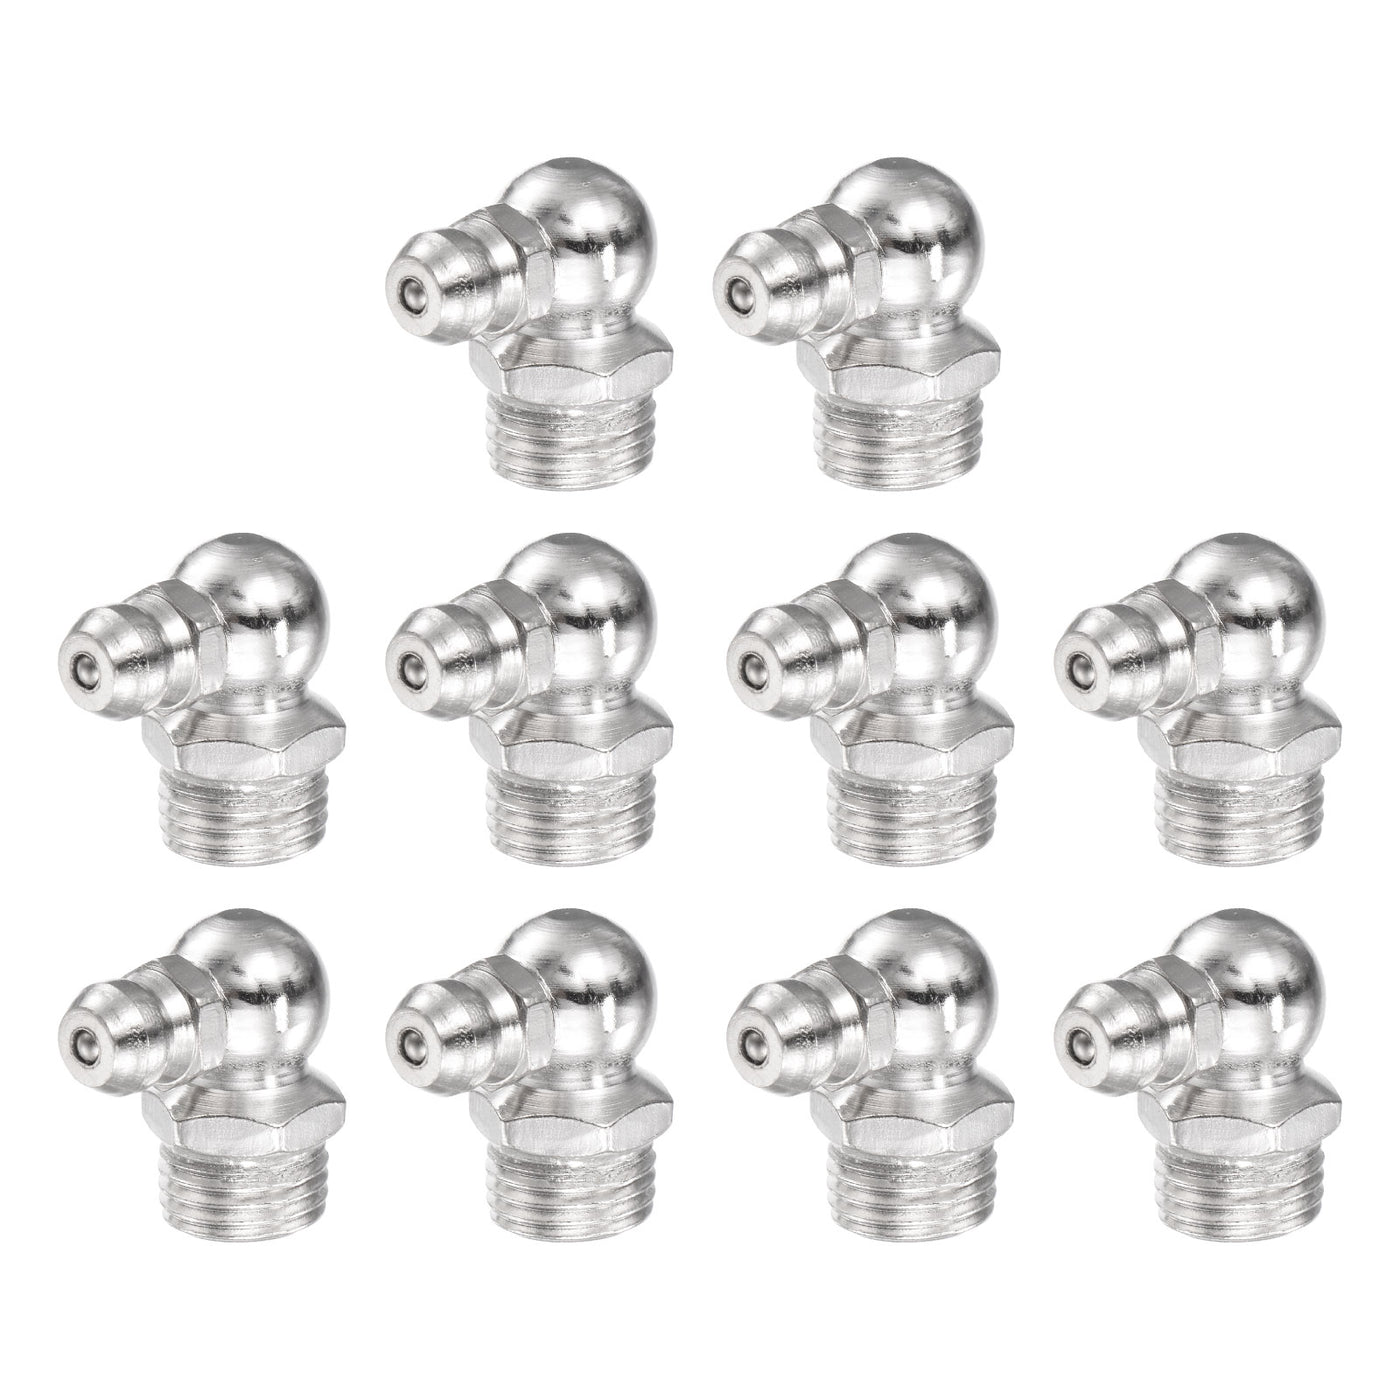 Uxcell Uxcell Nickel-Plated Iron 90 Degree Hydraulic Grease Fitting M8 x 1mm Thread, 10Pcs